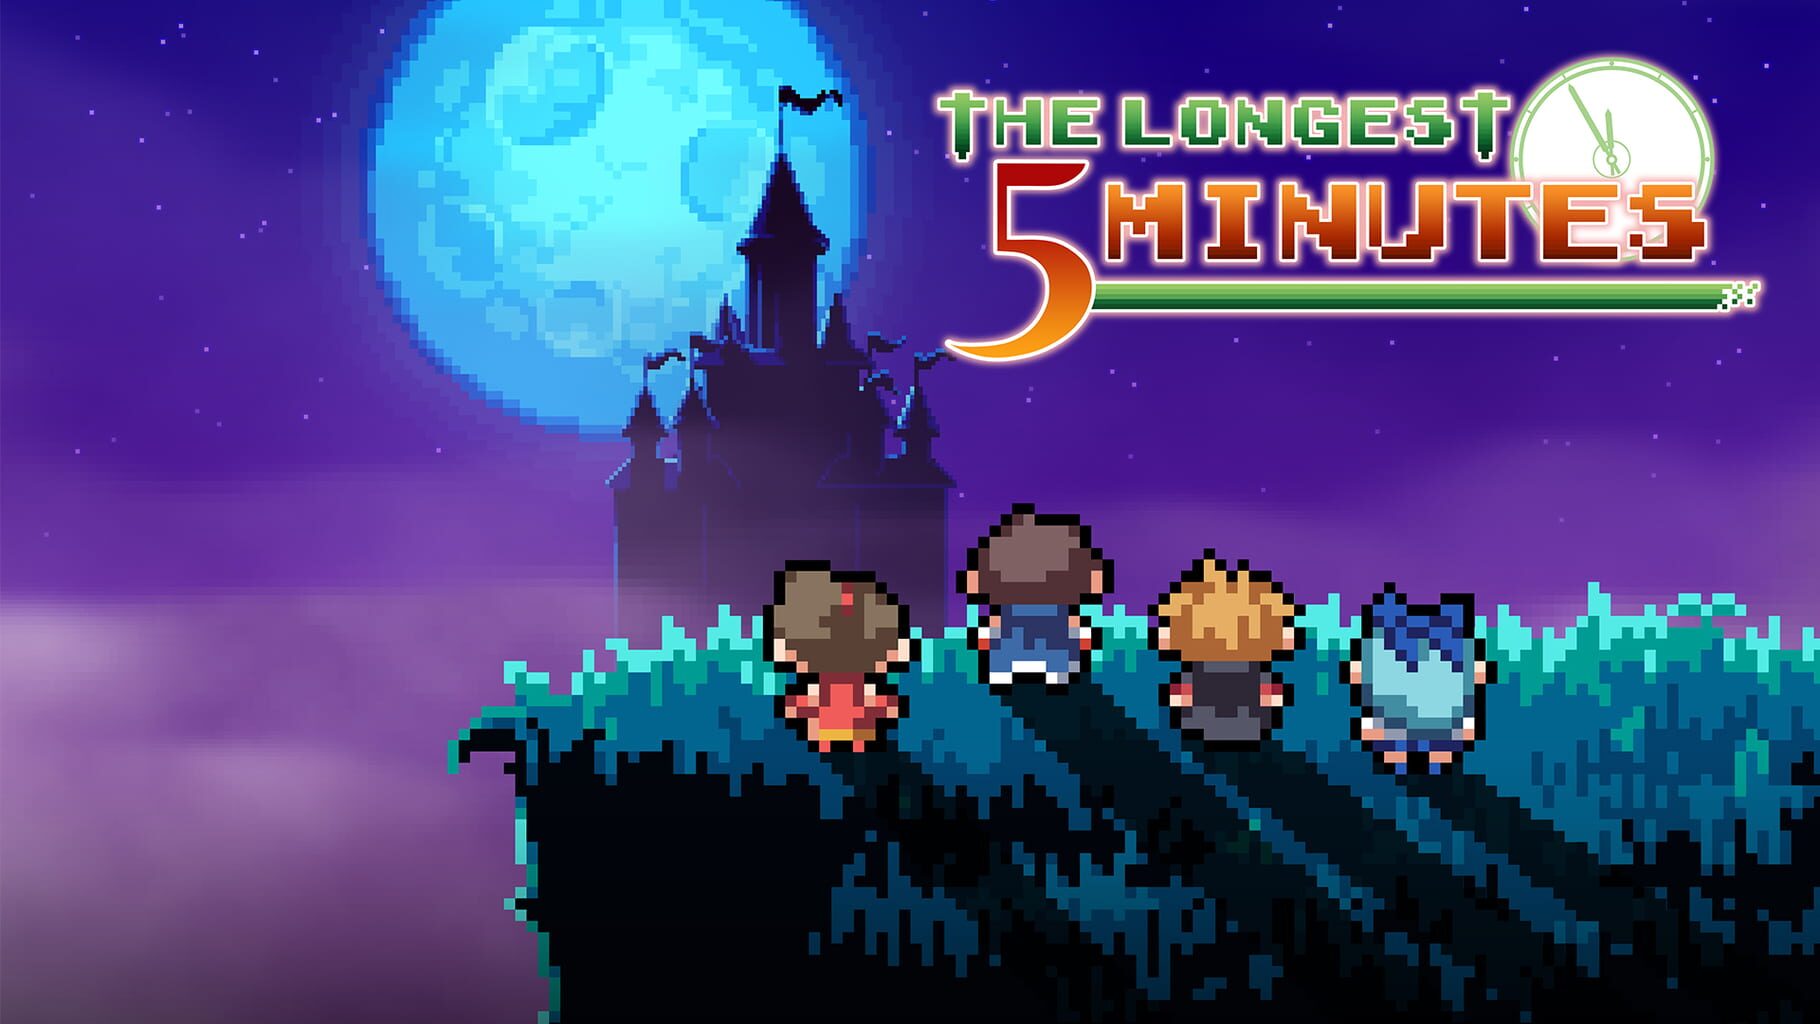 Artwork for The Longest Five Minutes